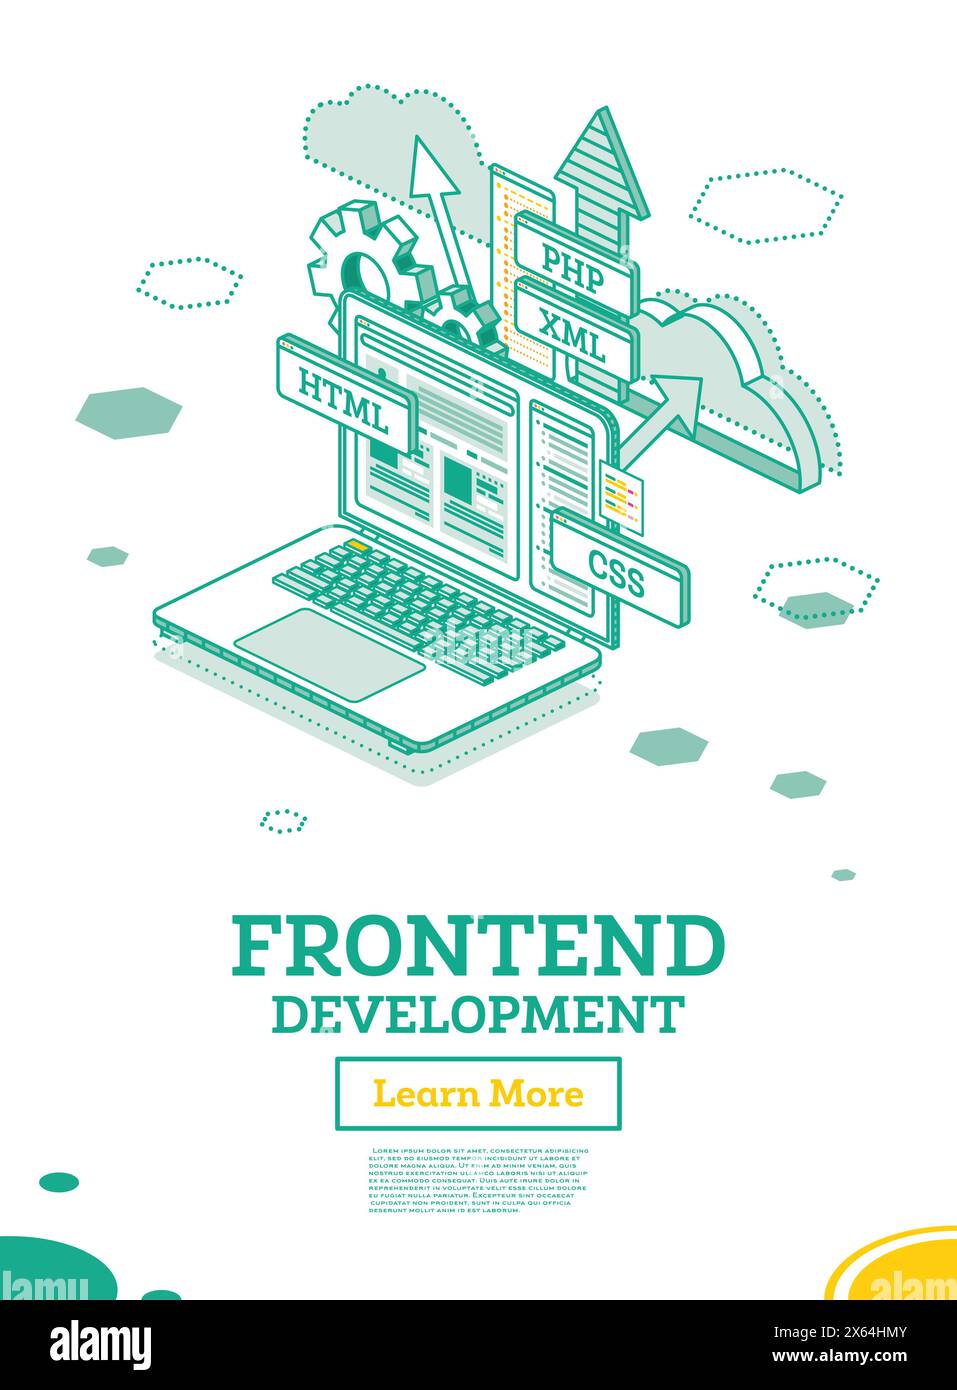 Frontend Development. Isometric Concept with Laptop Isolated on White. Creating a Site Layout Using Programming Languages. HTML, CSS, PHP and XML. Stock Vector